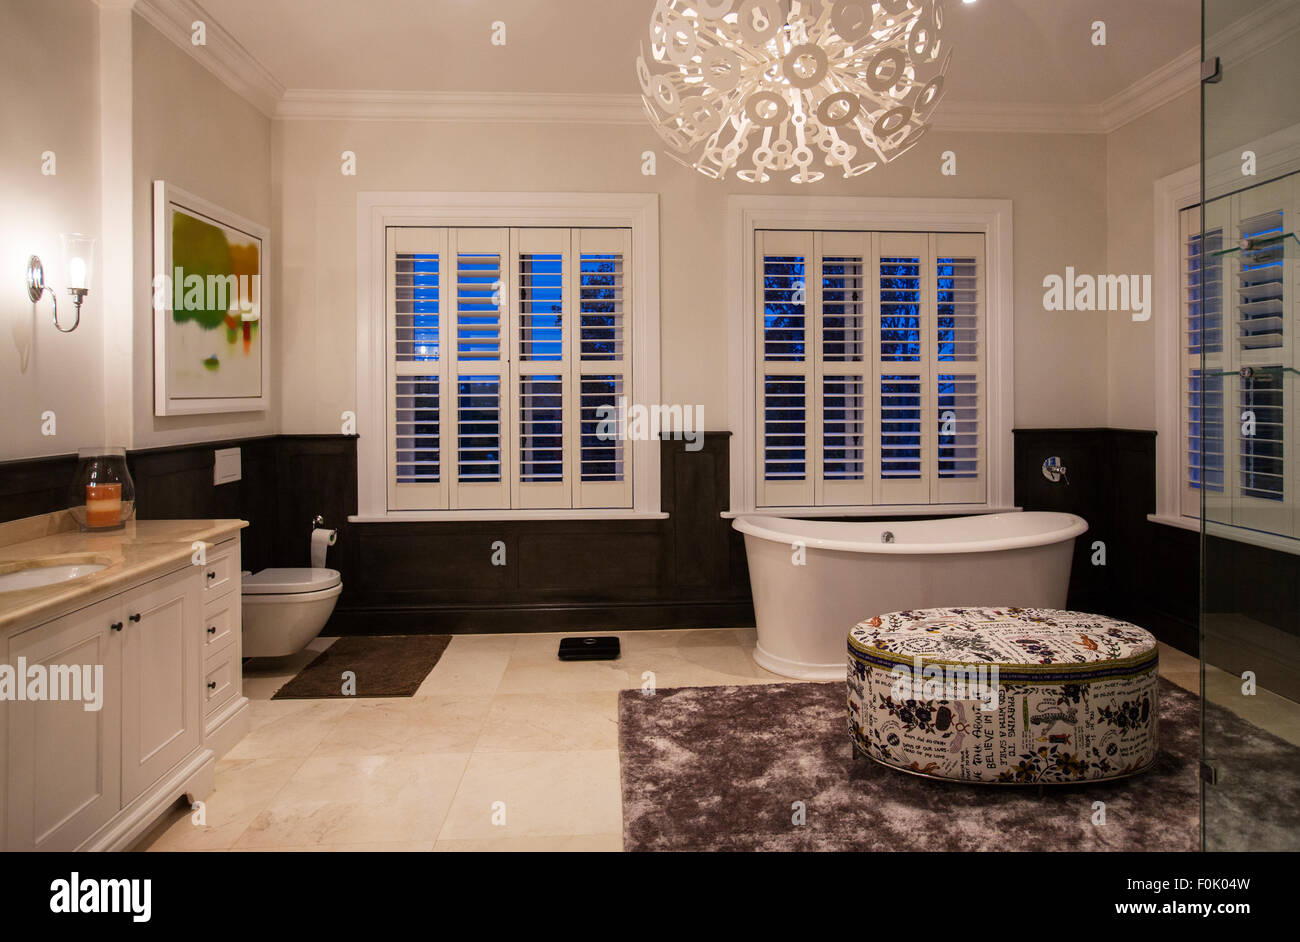 Soaking tub and modern chandelier in luxury bathroom at night Stock Photo